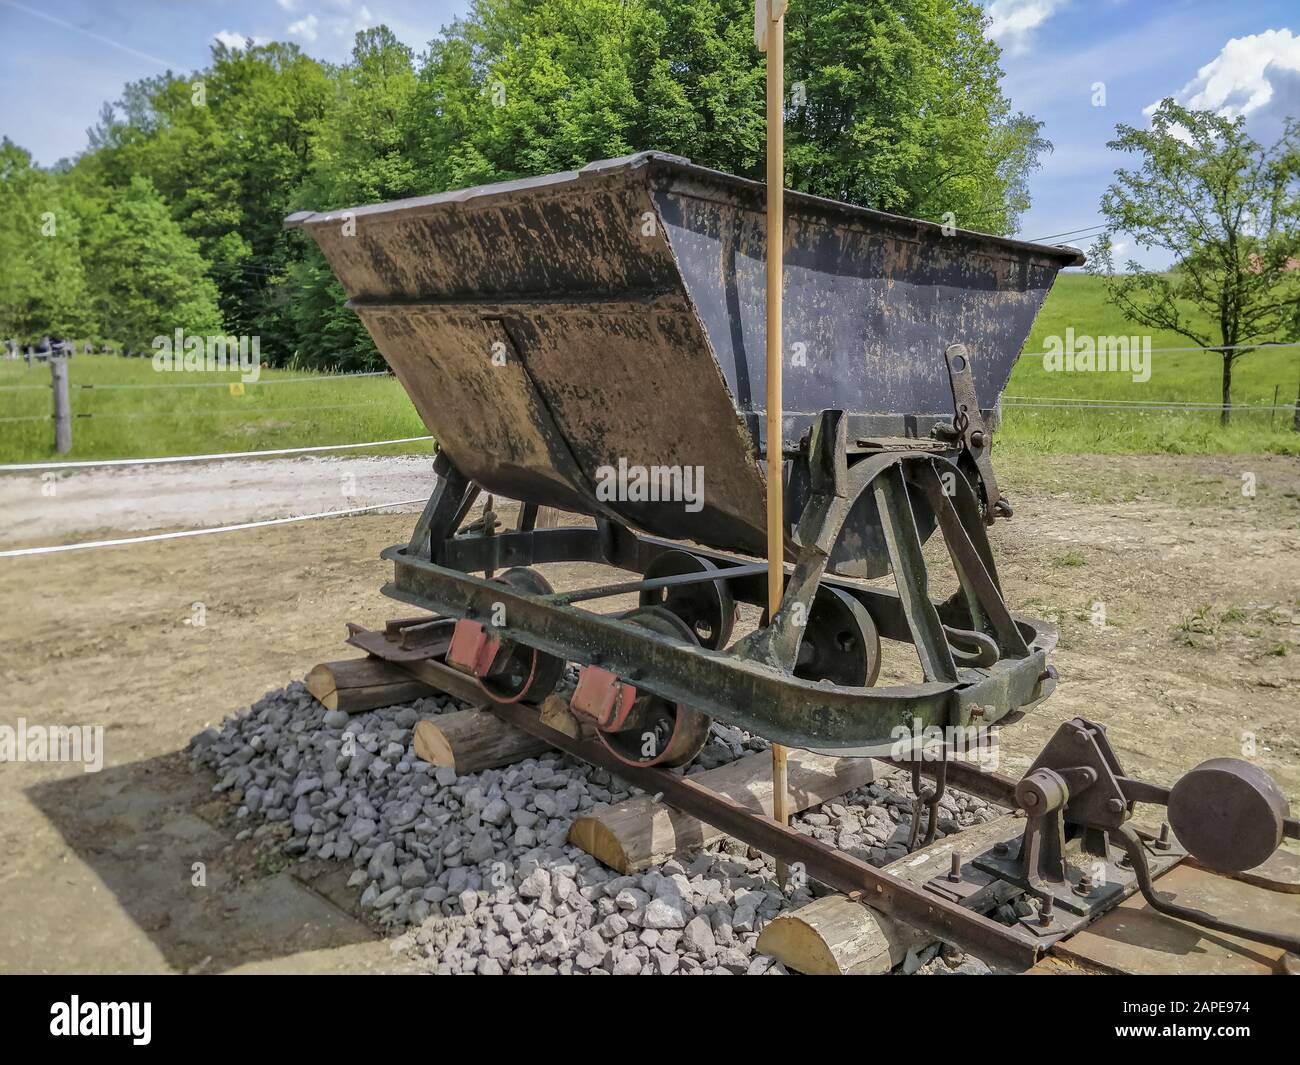 Old mine cart on tracks at daytime with a grassy field in the background Stock Photo